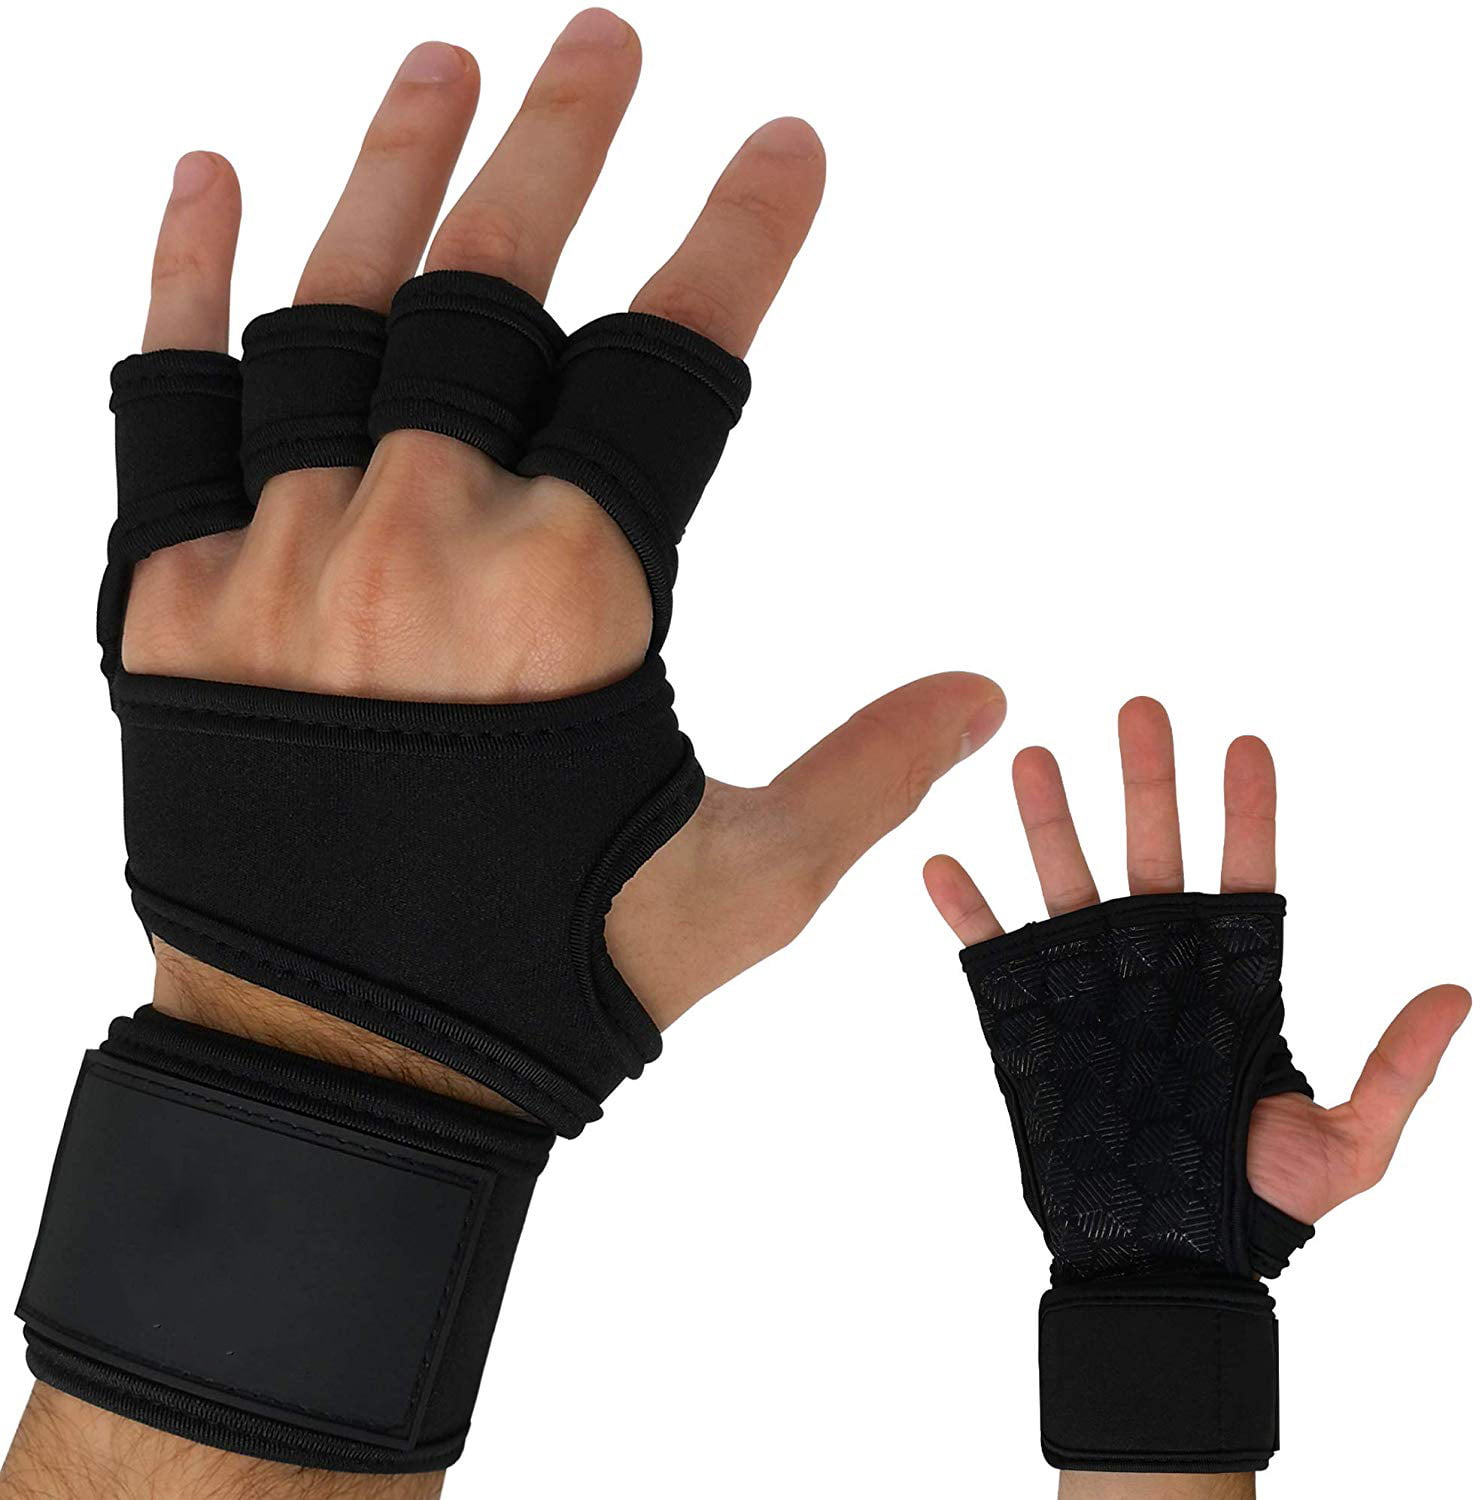 Workout Exercise Gloves Weight Lifting Training Gloves with Wrist Support for Fitness Full Palm Protection 